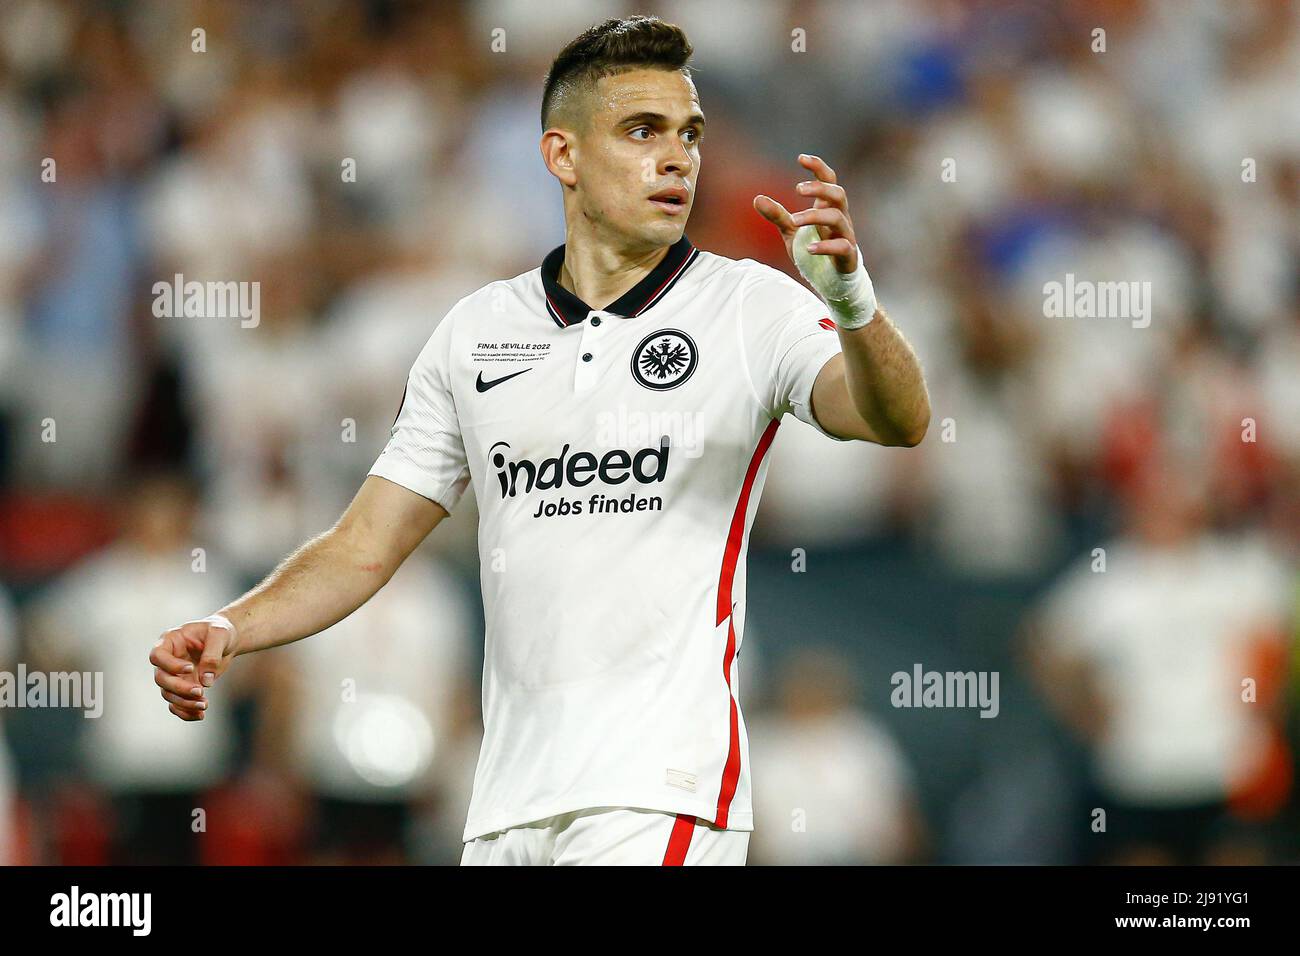 Sevilla, Spain, May 18, 2022, Rafael Borre of Eintracht  during the UEFA Europa League, final match between Eintracht Frakfurt and Rangers FC played at Sanchez Pizjuan Stadium on May 18, 2022 in Sevilla, Spain. (Photo by PRESSINPHOTO) Stock Photo